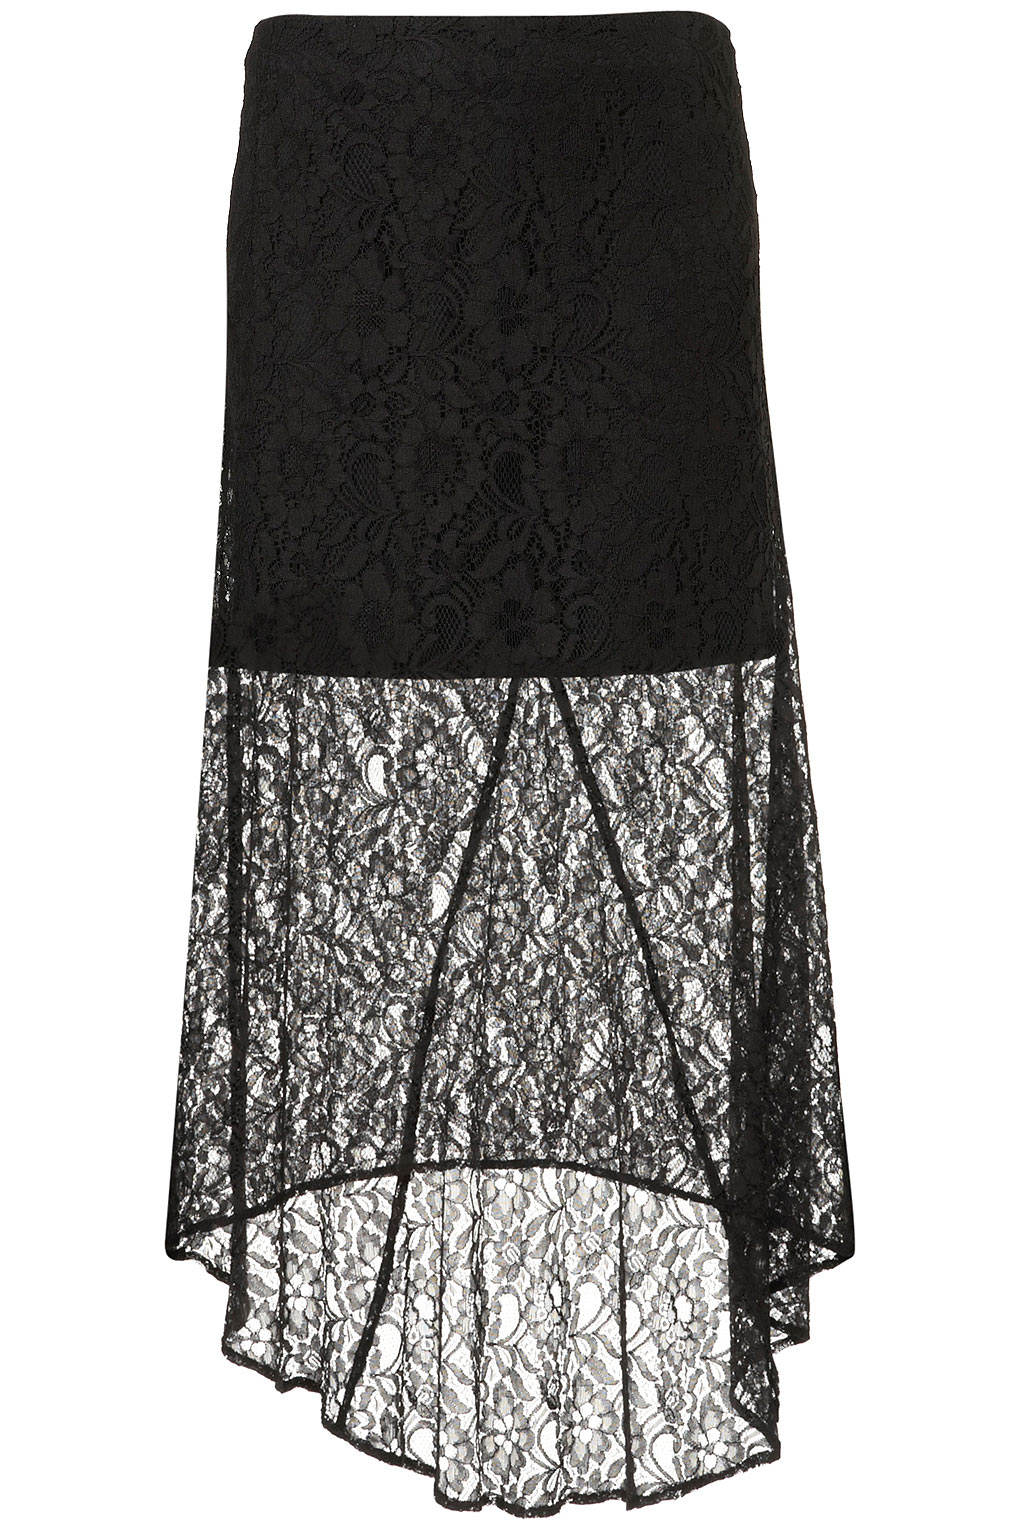 Topshop Black Lace Maxi Skirt in Black | Lyst